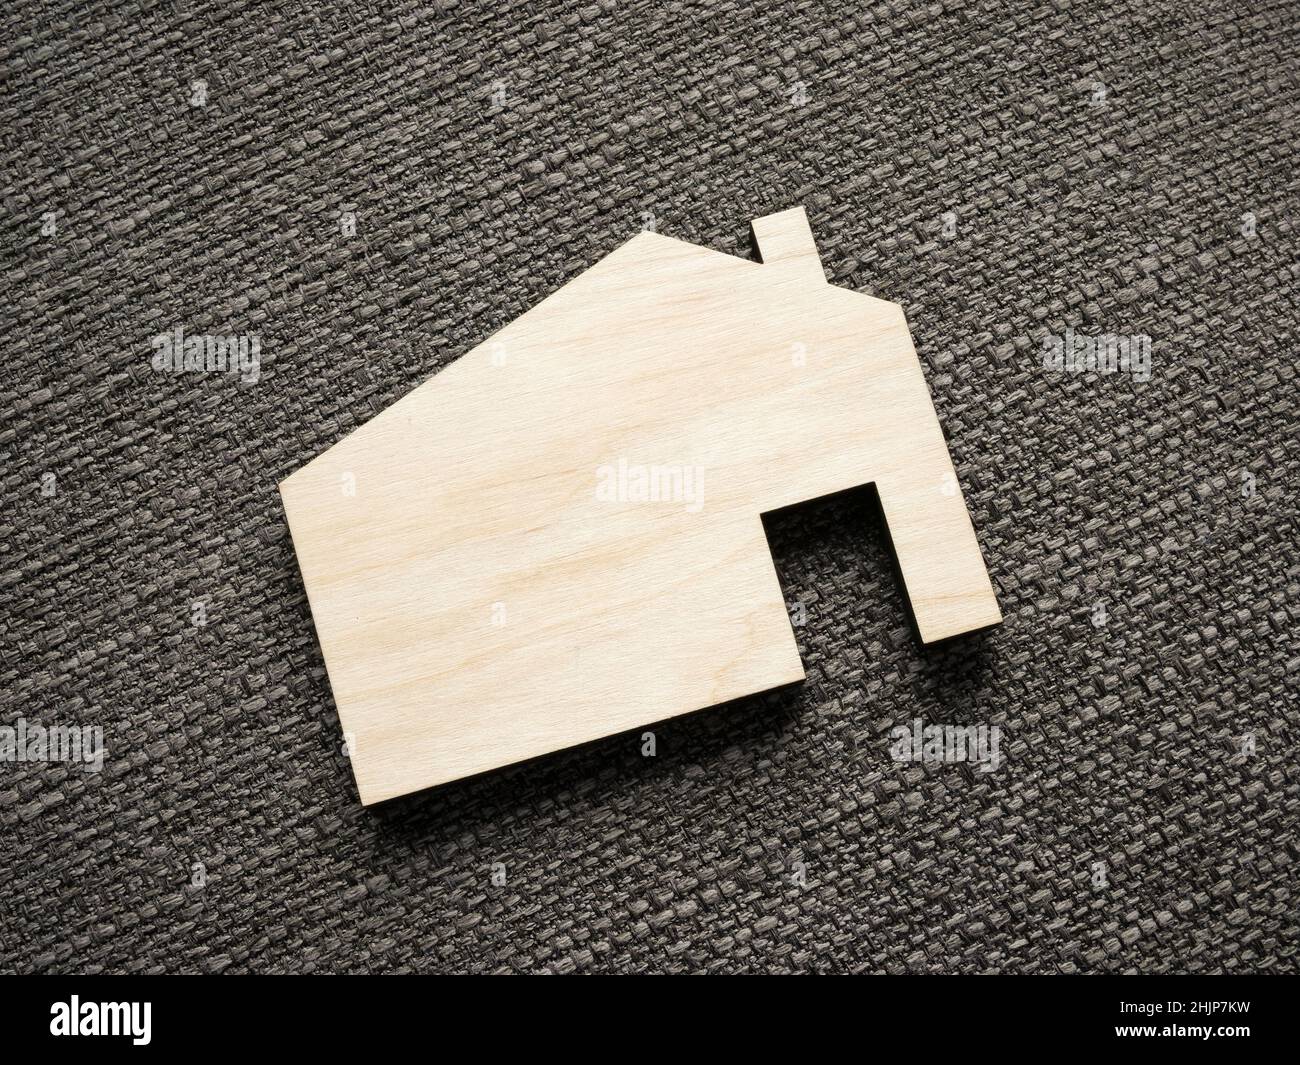 Wooden model of the house. Mortgage and purchase of real estate. Stock Photo